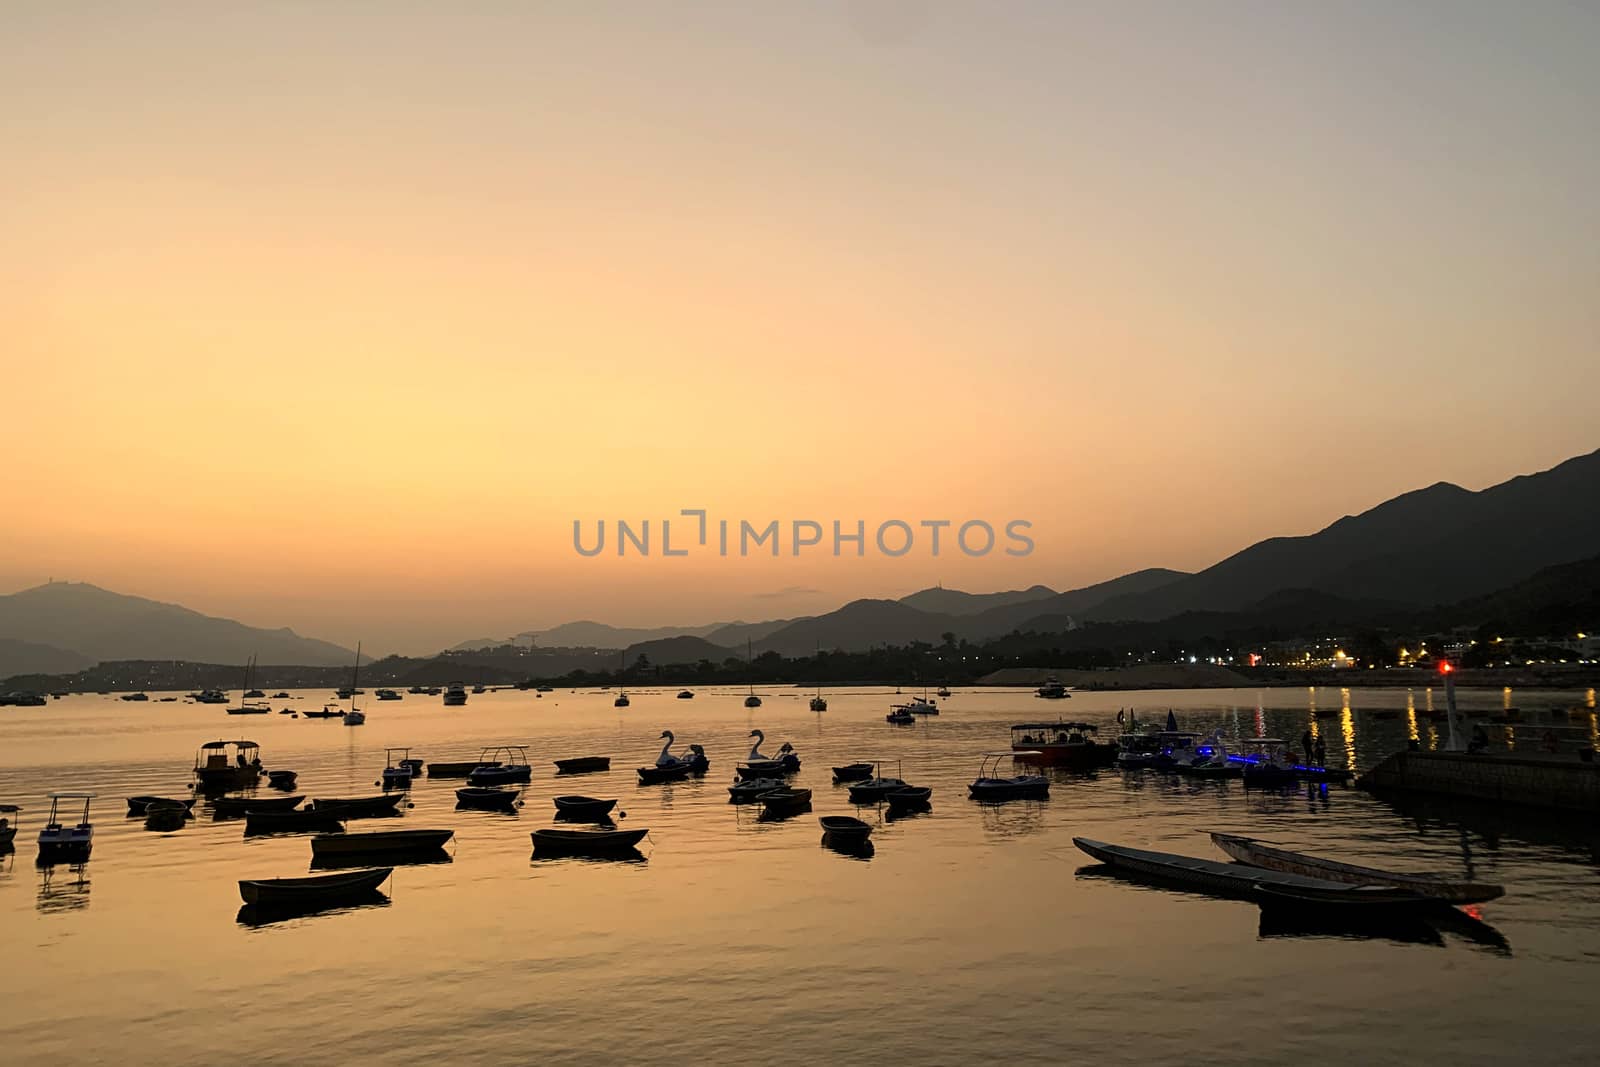 The mountain, recreational wooden boats, lake, gradient orange sky in Hong Kong countryside